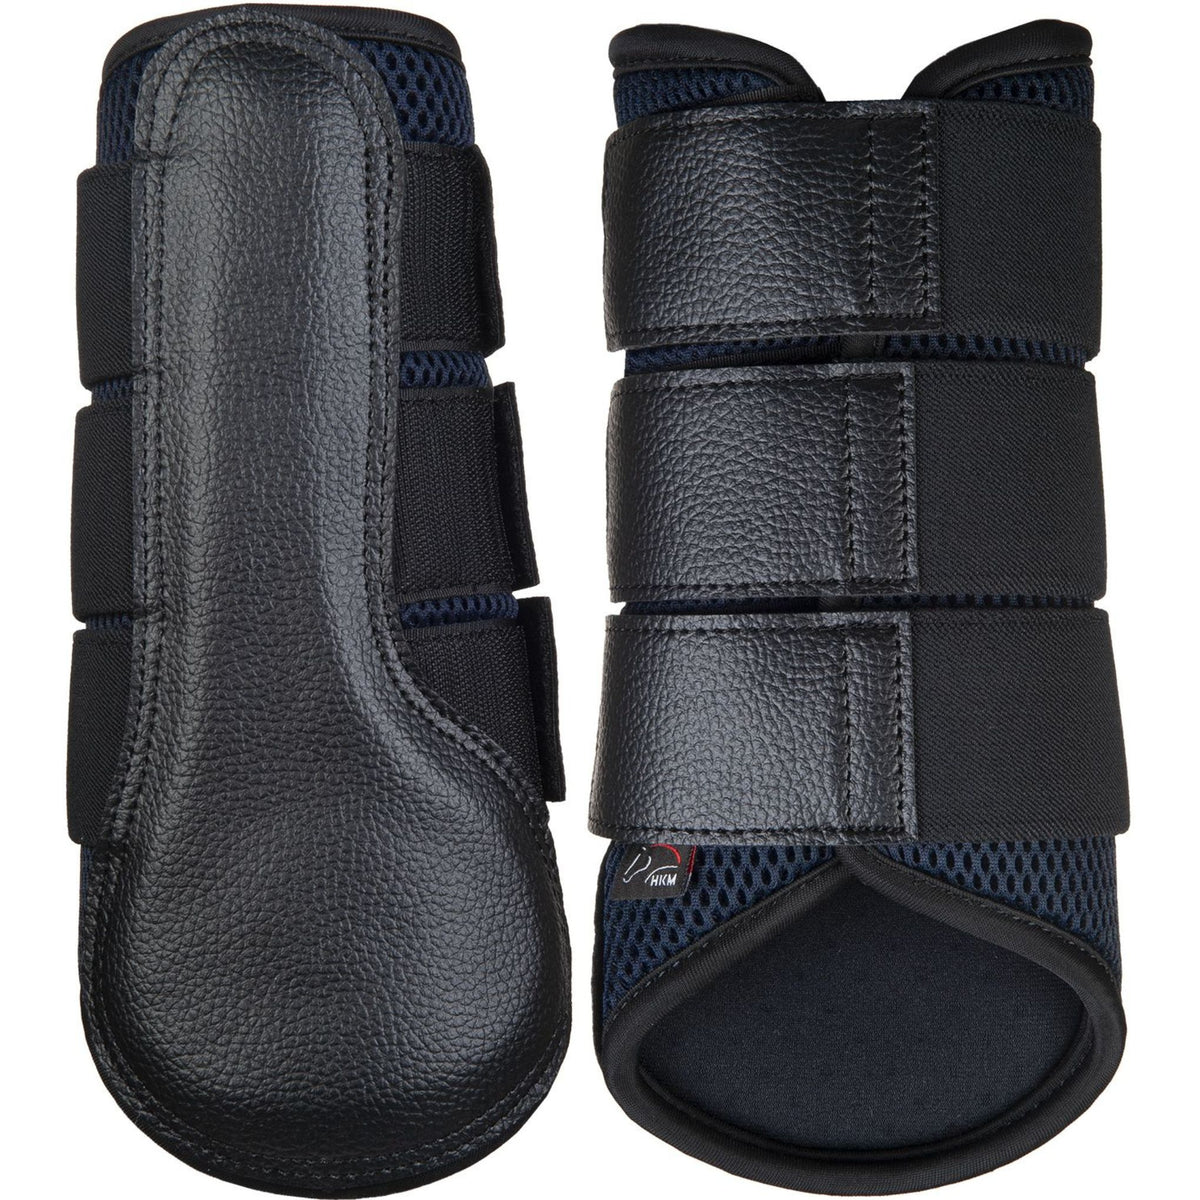 Navy fetlock boots with black strapping